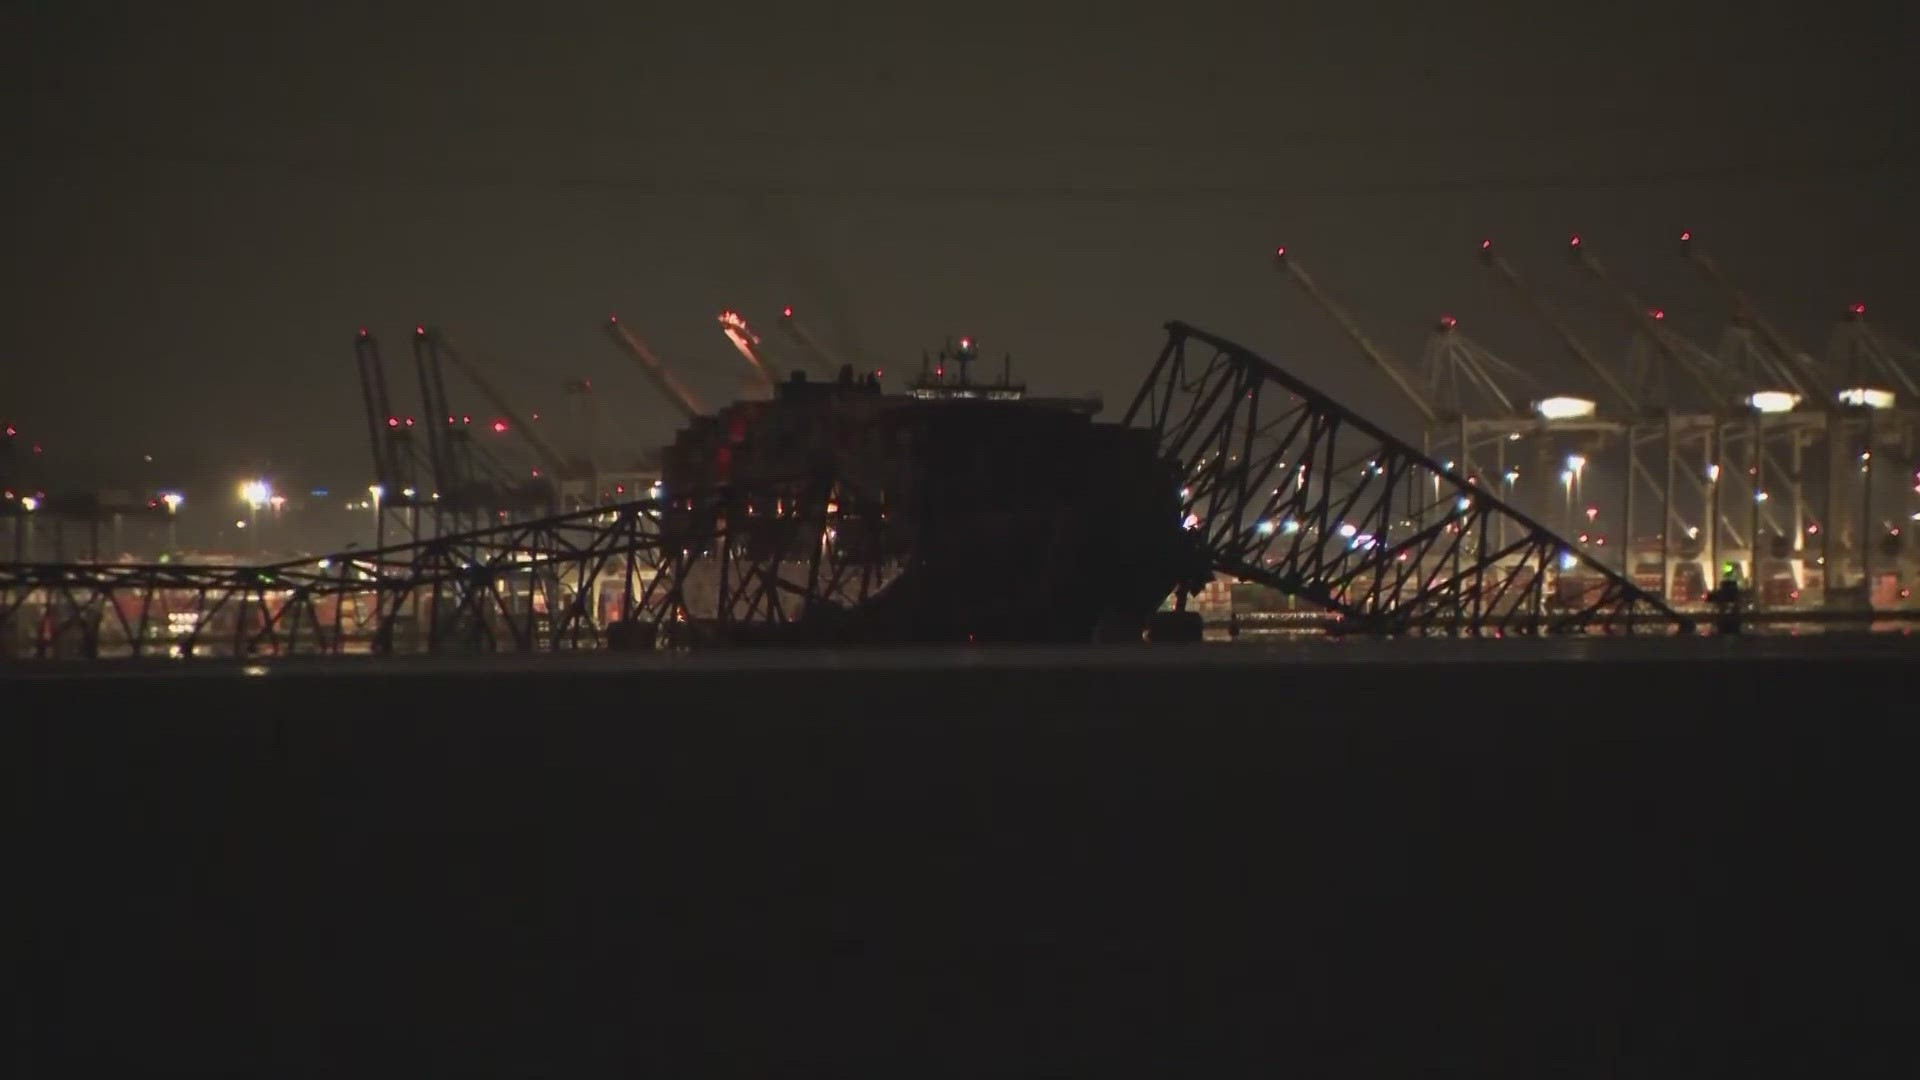 A major bridge in Baltimore snapped and collapsed after a container ship rammed into it early Tuesday, and several vehicles fell into the river below.